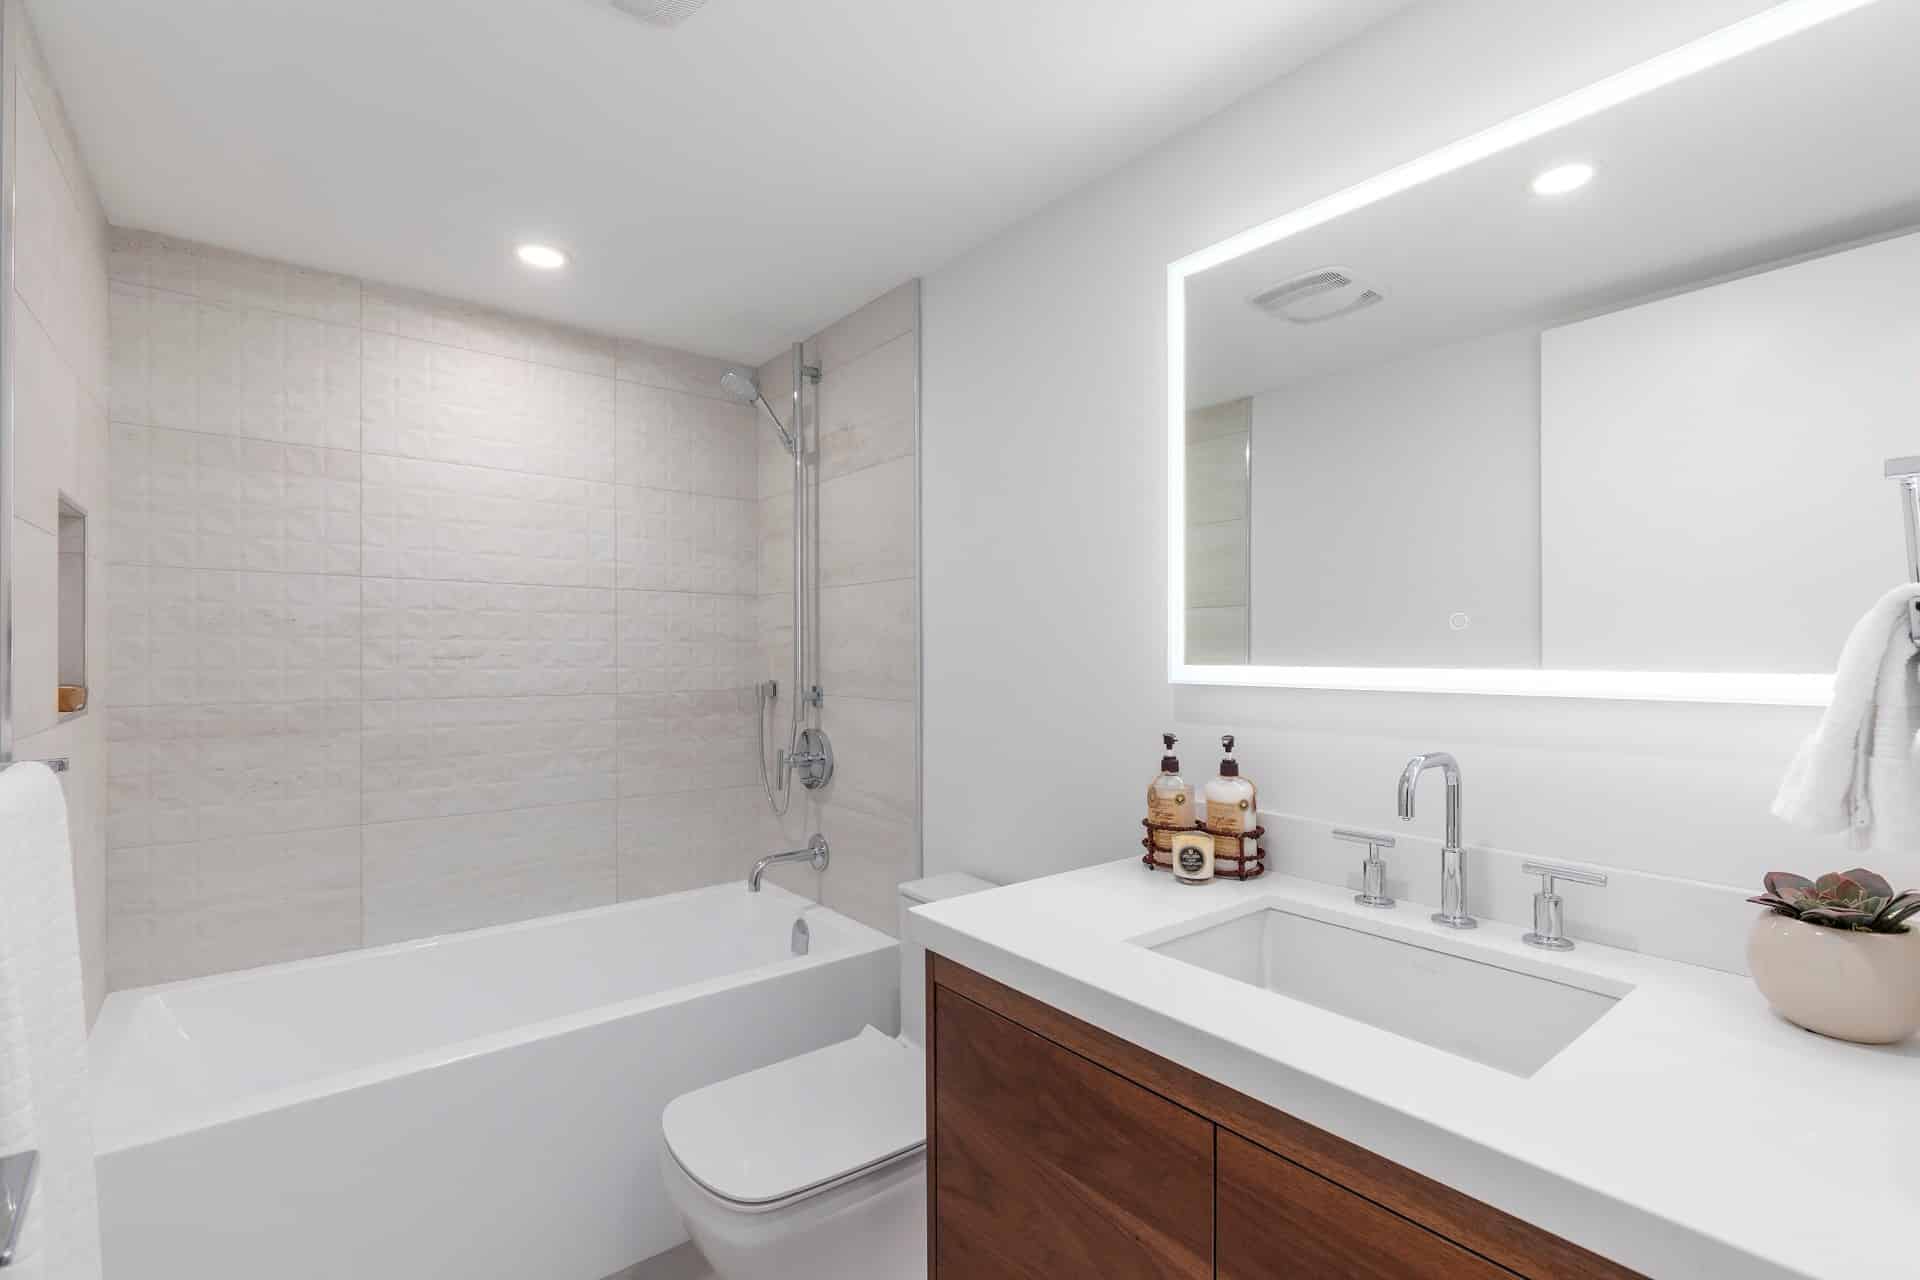 bathroom-remodel-lighted-mirror-3d-wall-tile-tub-niche